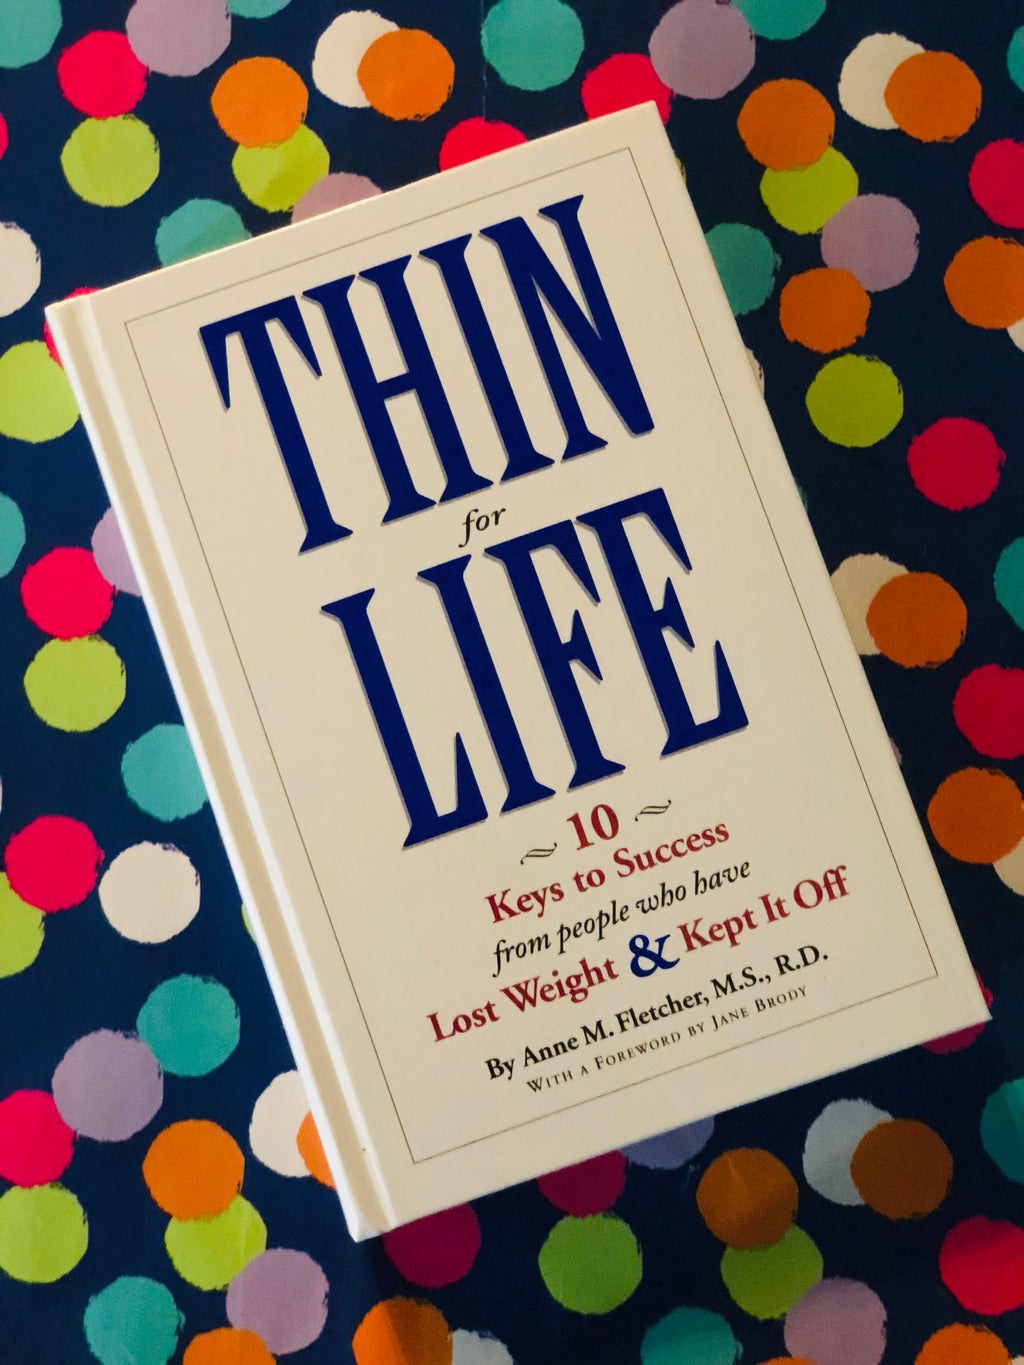 Thin for Life- By Anne M. Fletcher, M.S., R.D